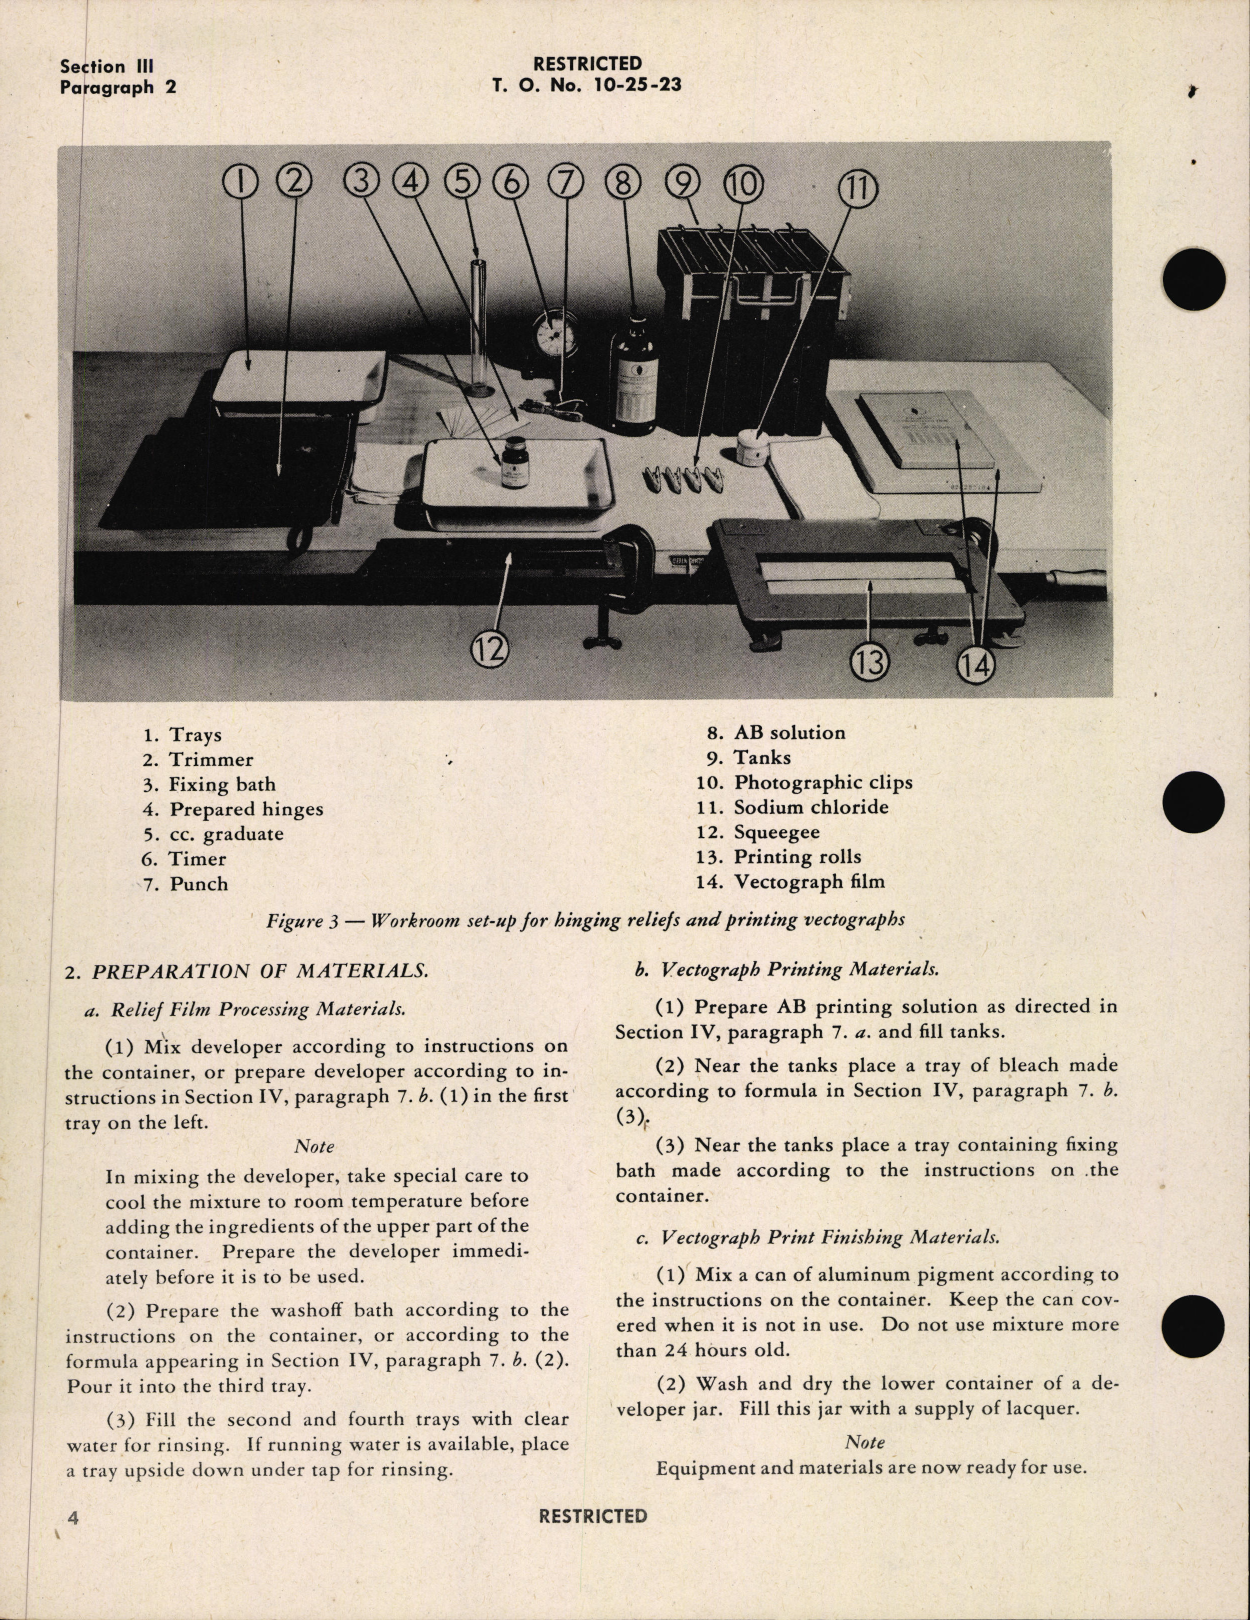 Sample page 8 from AirCorps Library document: Handbook of Instructions with Parts Catalog for Vectograph Kits Polaroid